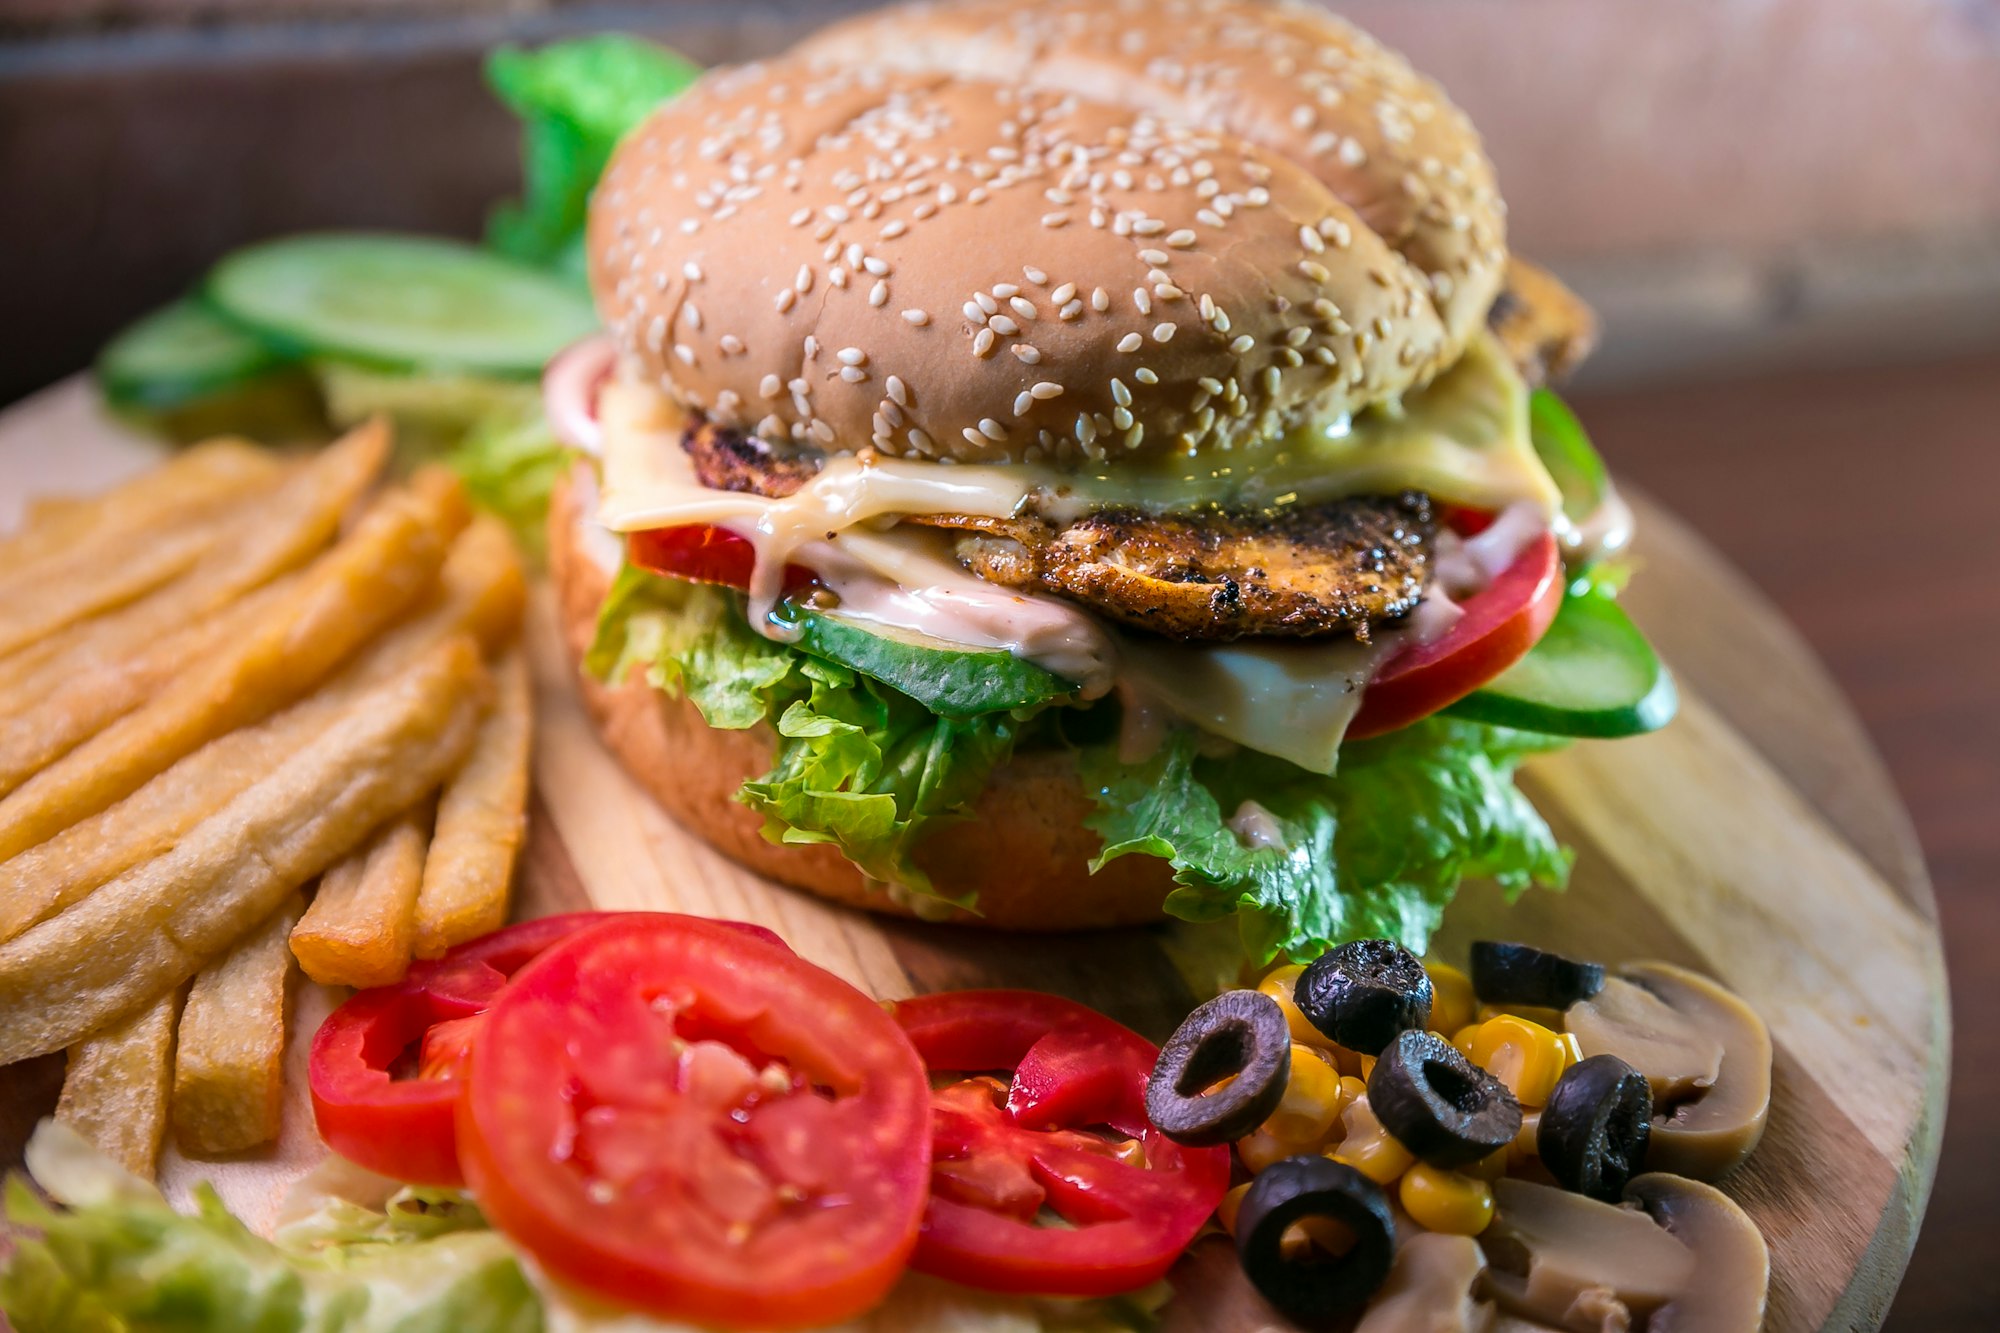 A burger, fries, tomatoes, olives, mushrooms, and other ingredients on a serving platter.